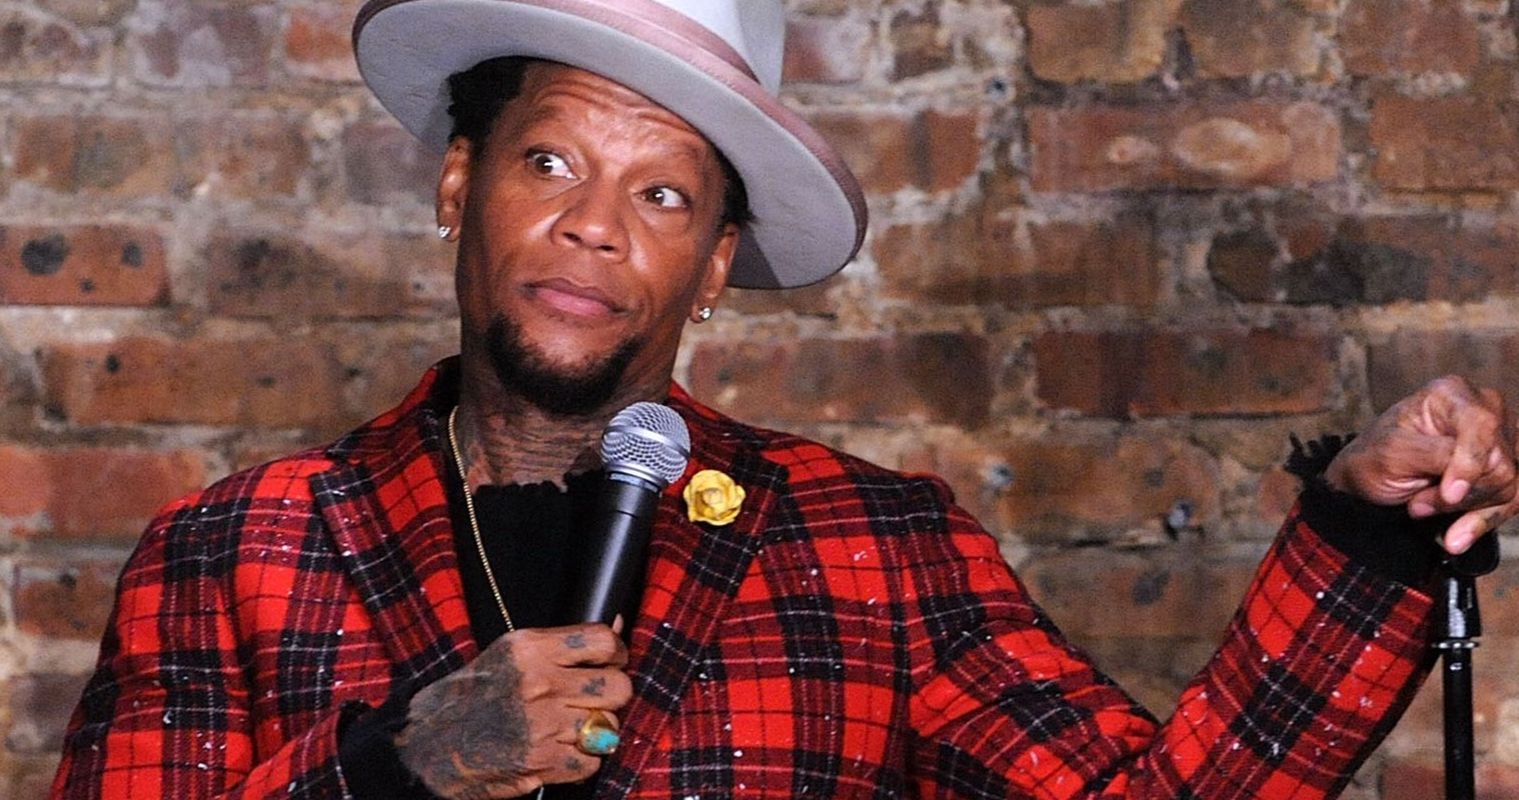 D.L. Hughley Tests Positive for COVID-19 After Collapsing During Stand-Up Show